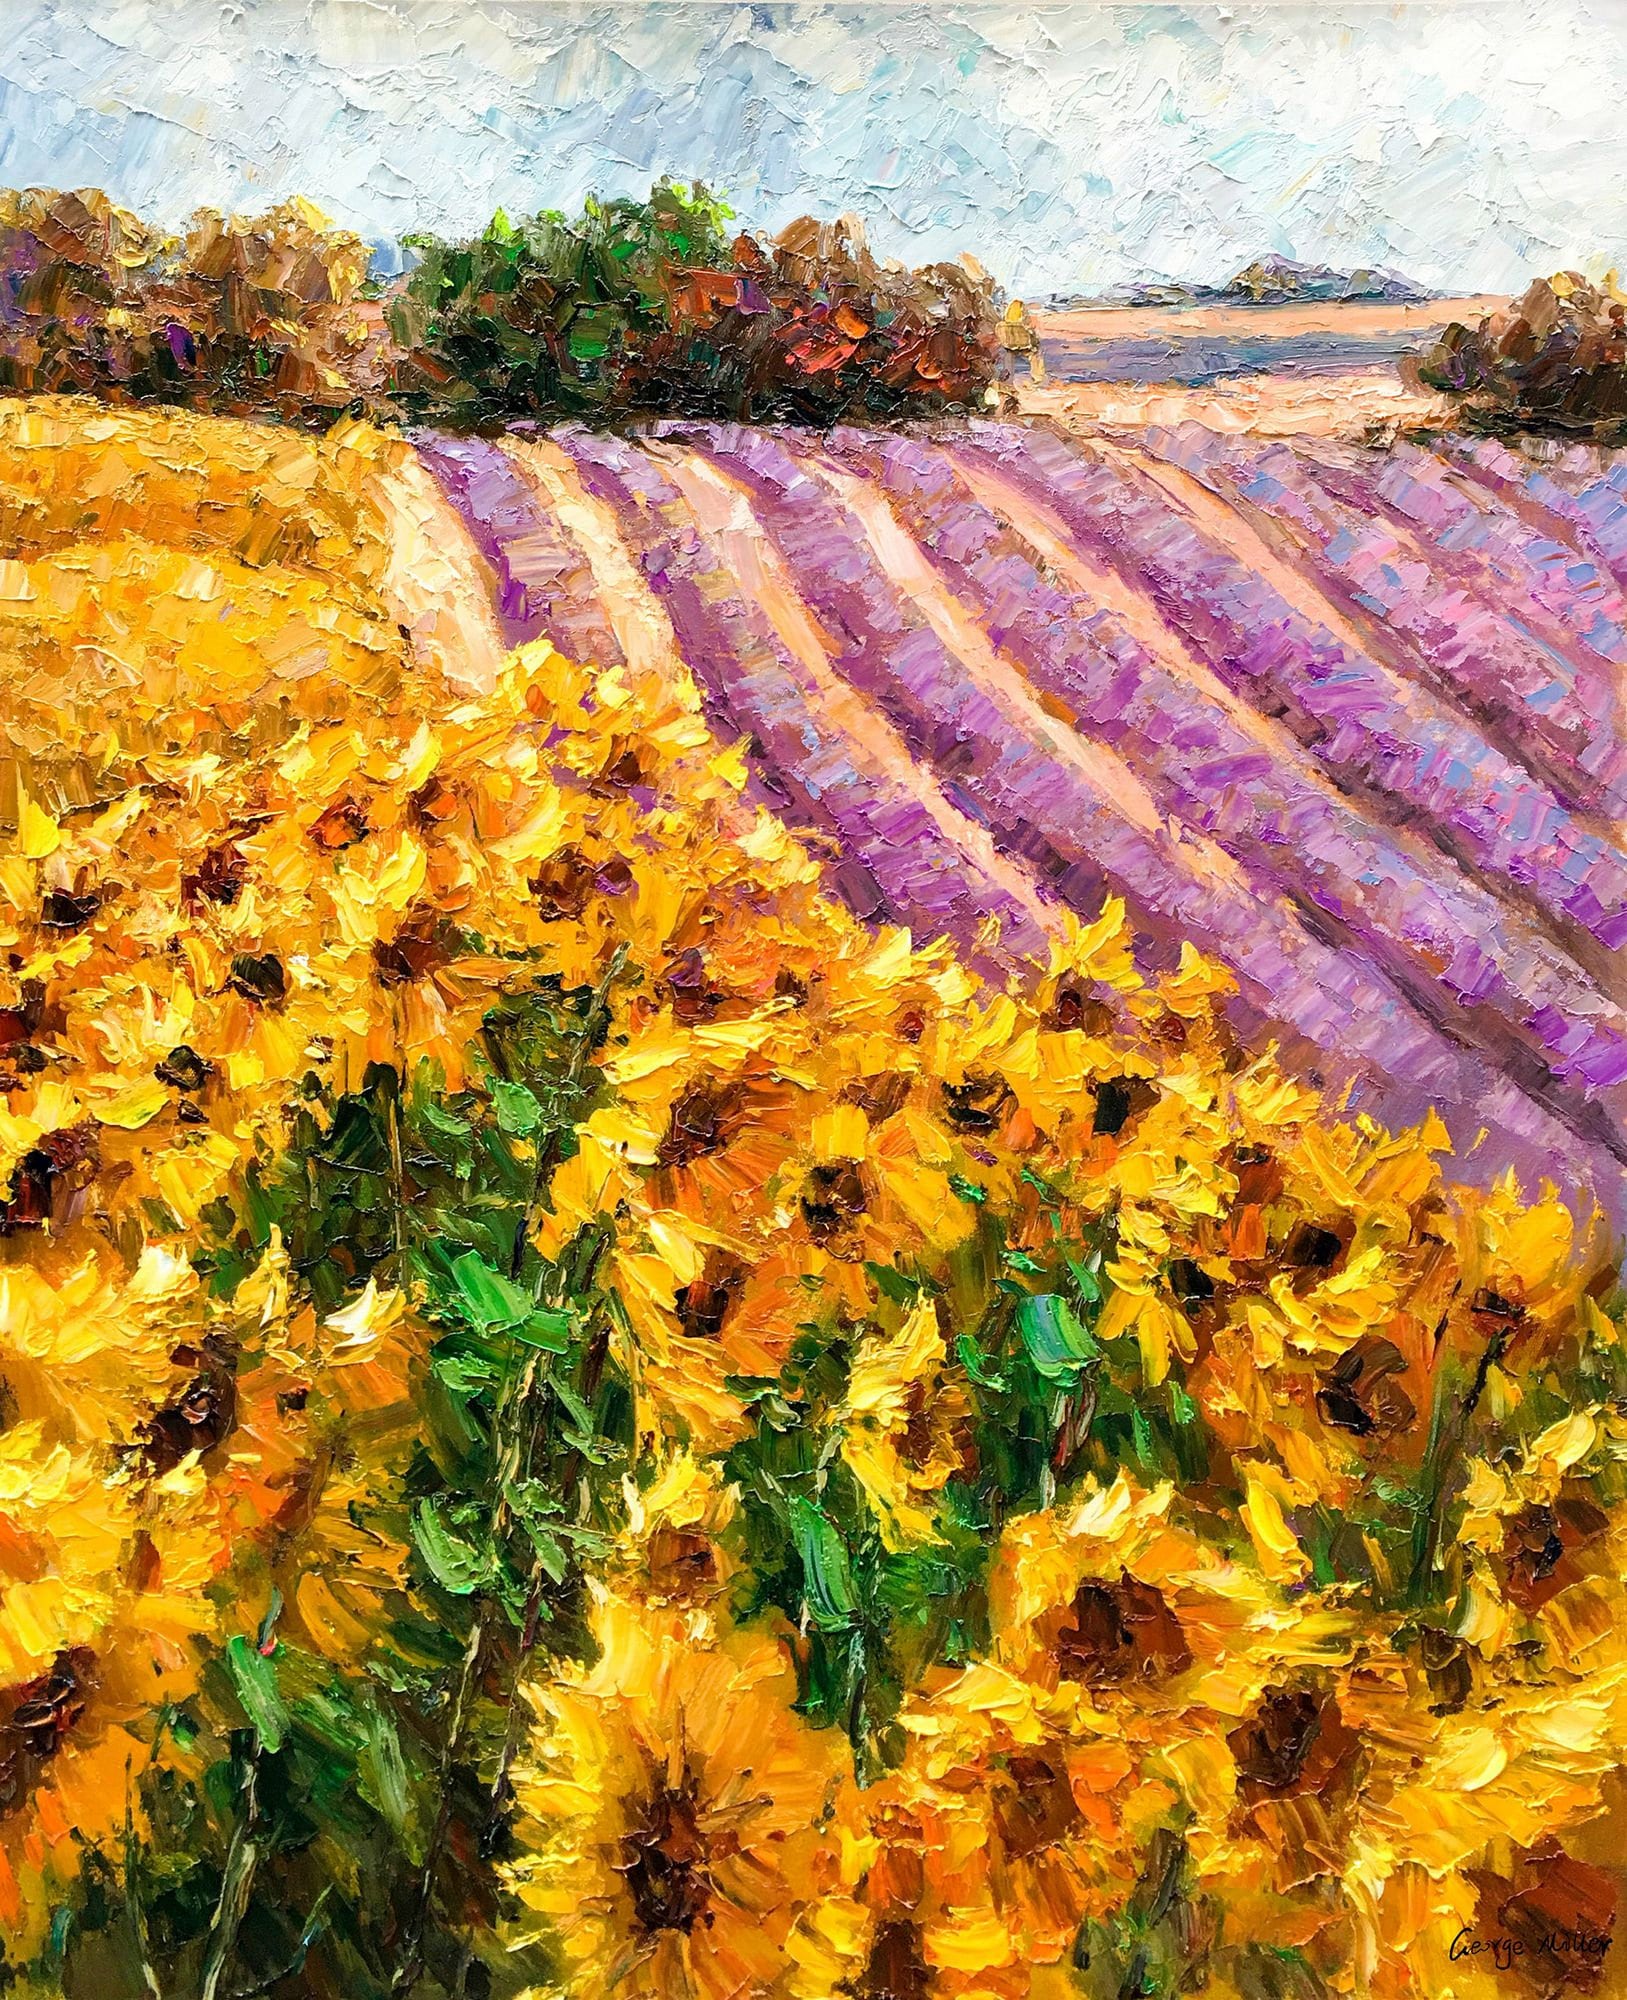 Large Oil Painting Tuscany Landscape Lavender Fields with Sunflowers, Large Painting, Flower Oil Painting, Large Canvas Wall Art, Yellow